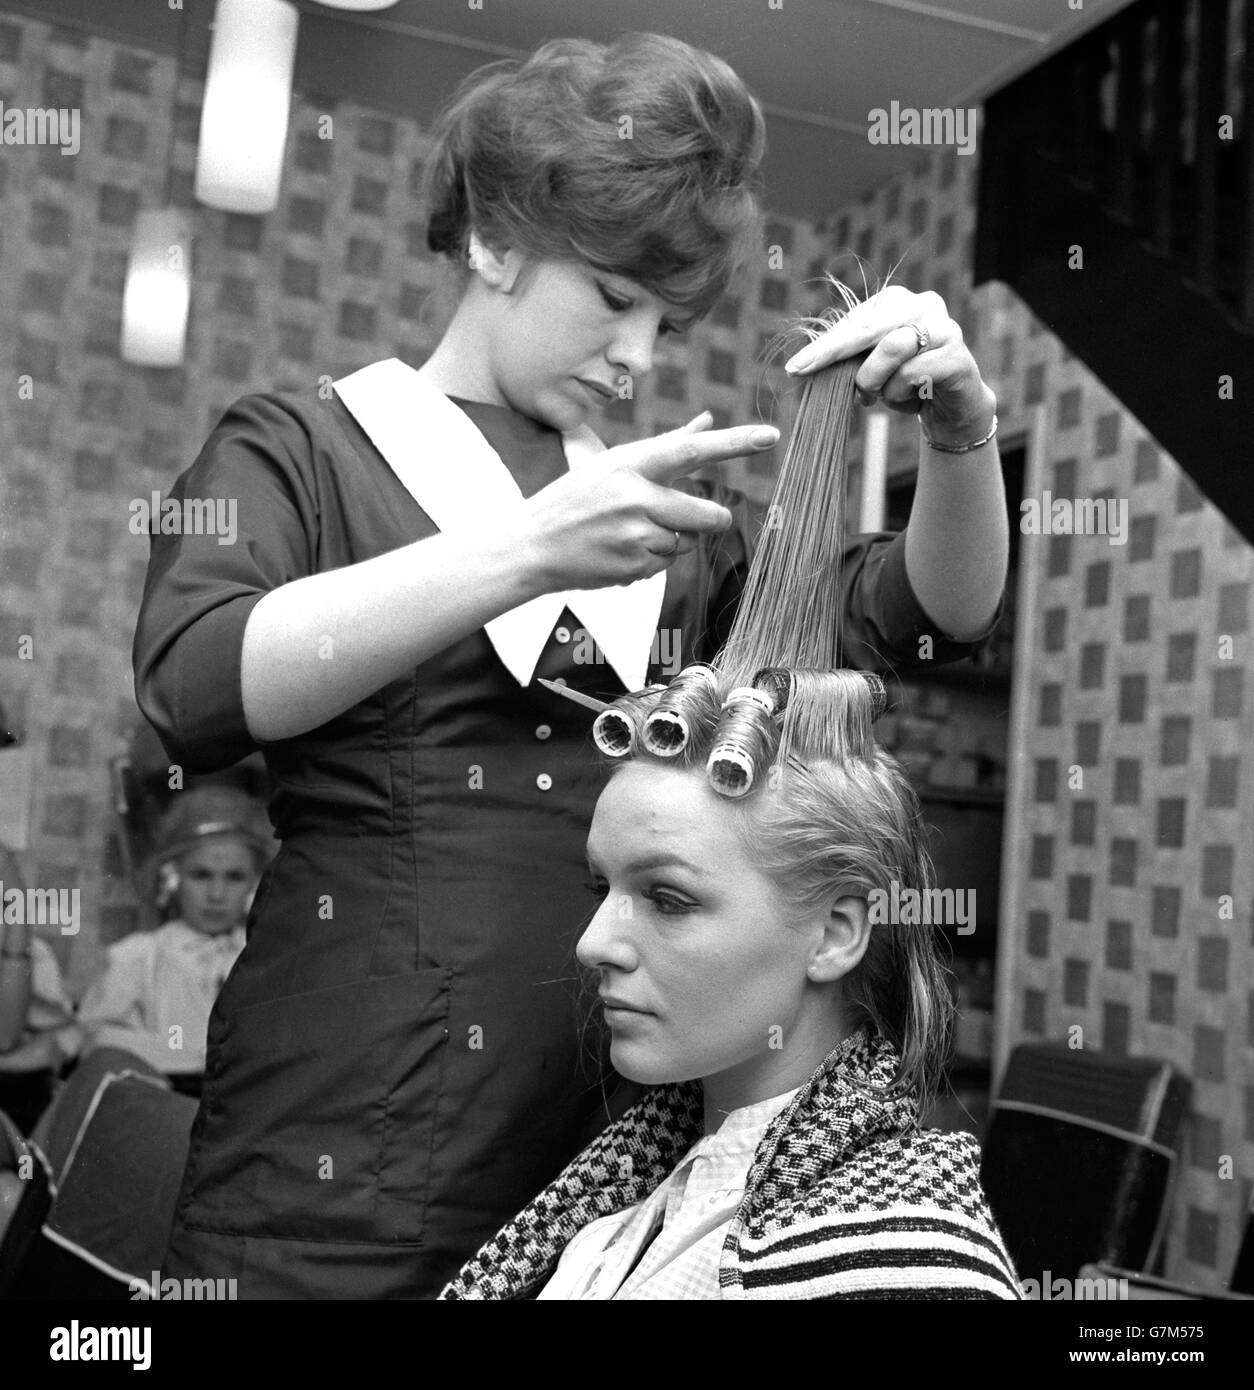 Miss Denmark Yvonne Mortensen has curlers put in her hair during a visit to La Belle salon in Aldwych. The Miss World competition takes place tomorrow night at the Lyceum Ballroom. Stock Photo